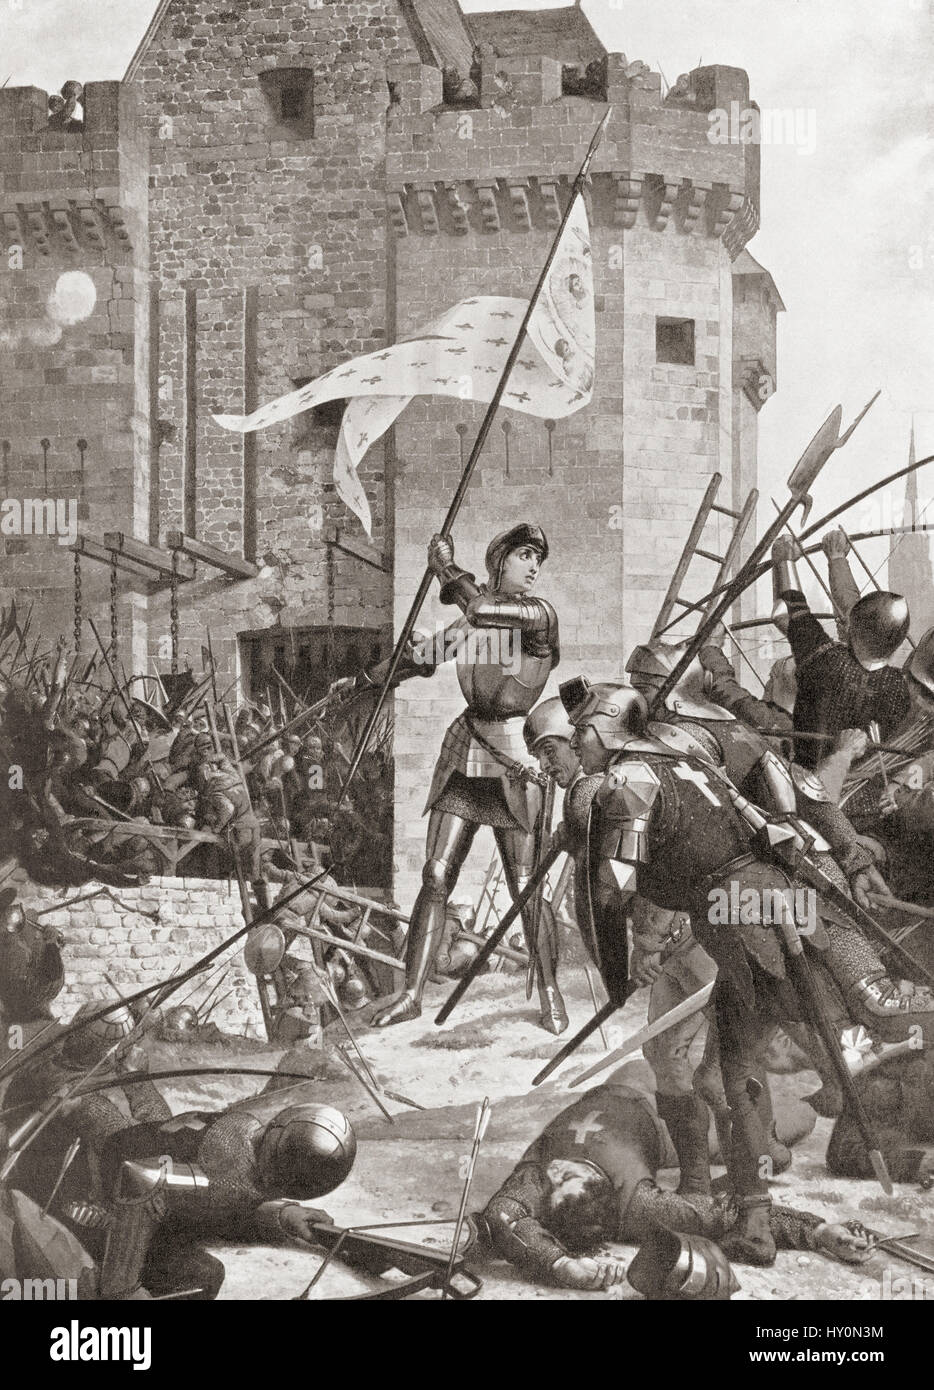 Joan of Arc at the siege of Orleans, May 1429. Joan of Arc, 1412 - 1431, aka